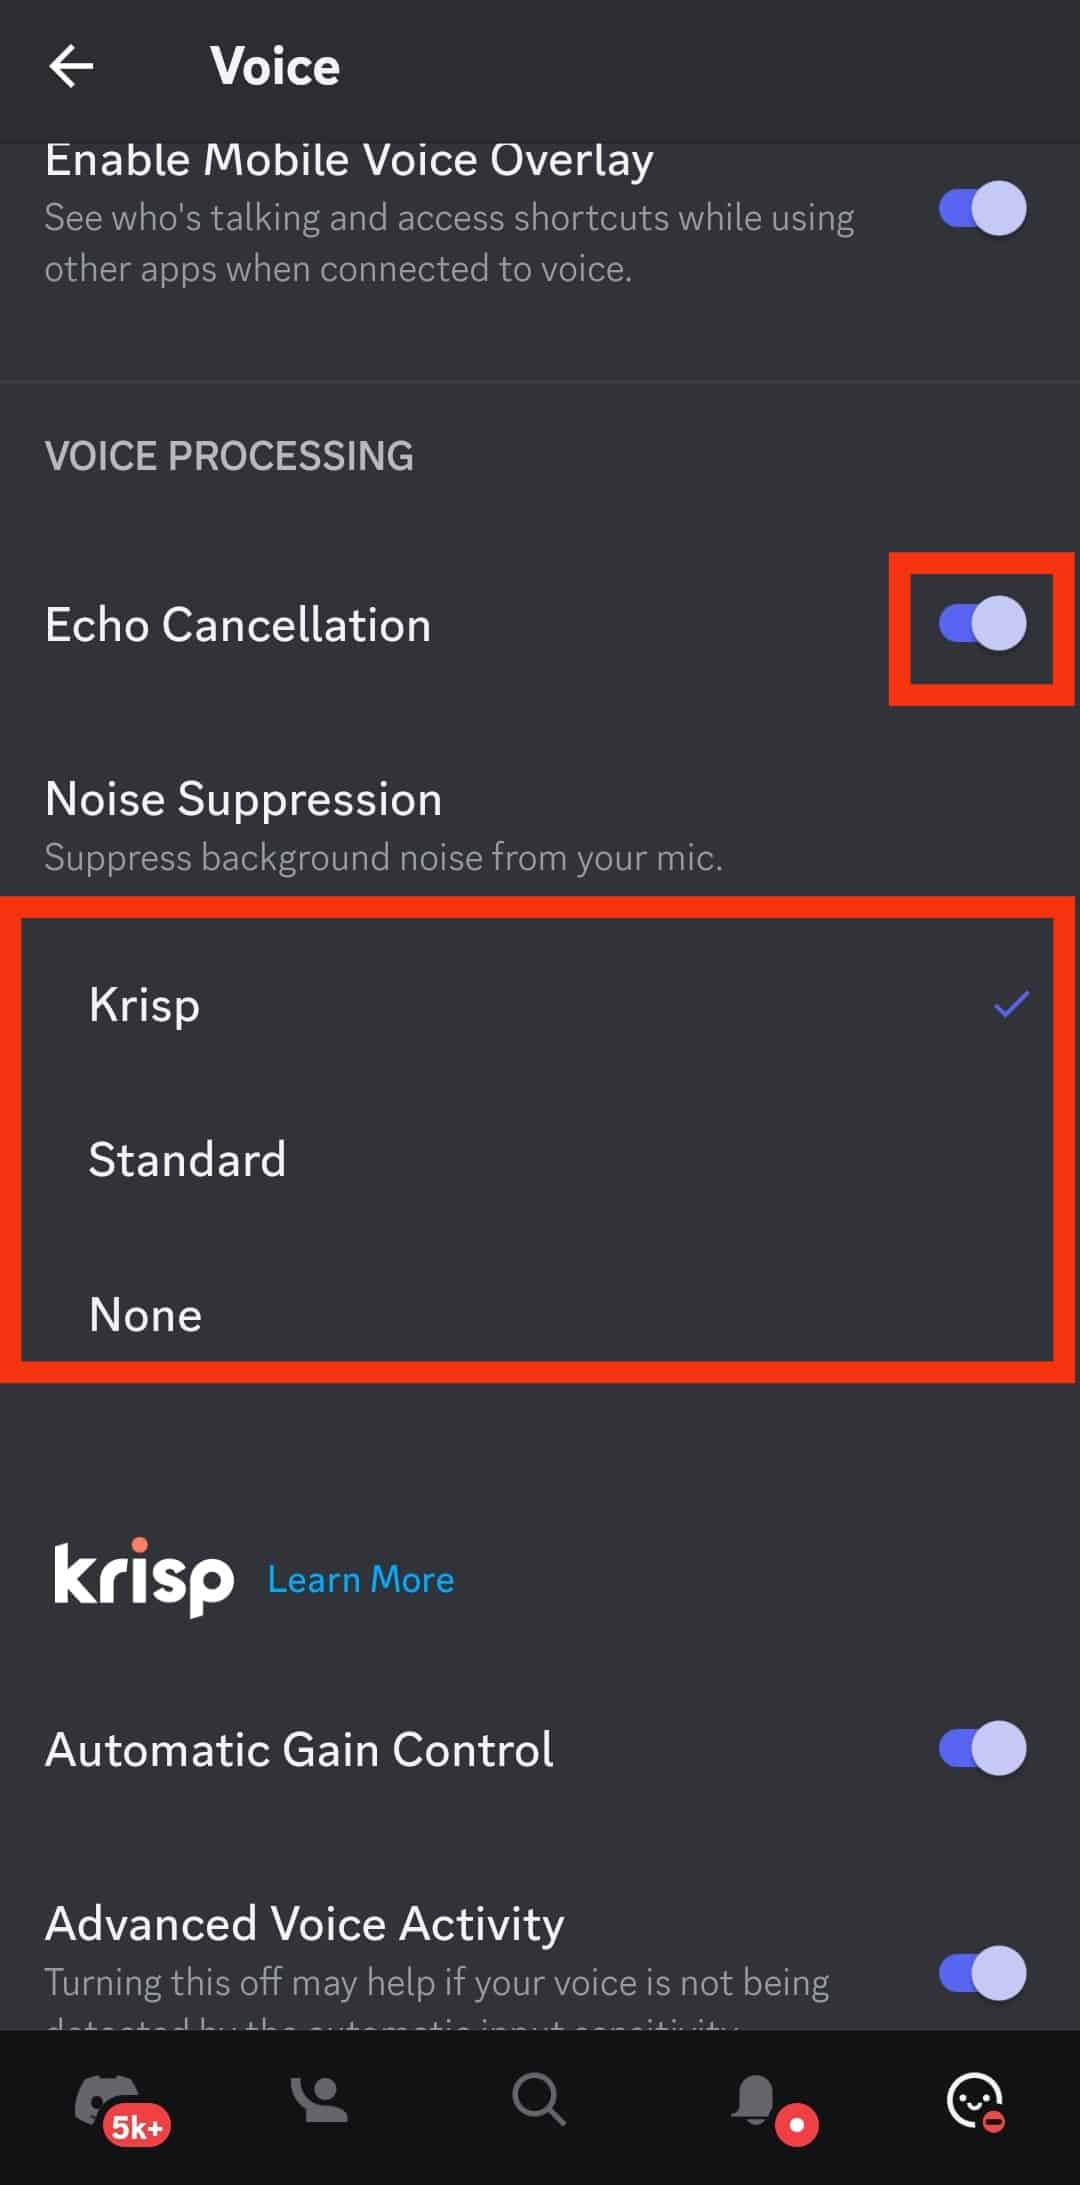 Enable The Noise Suppression And Echo Cancellation Options